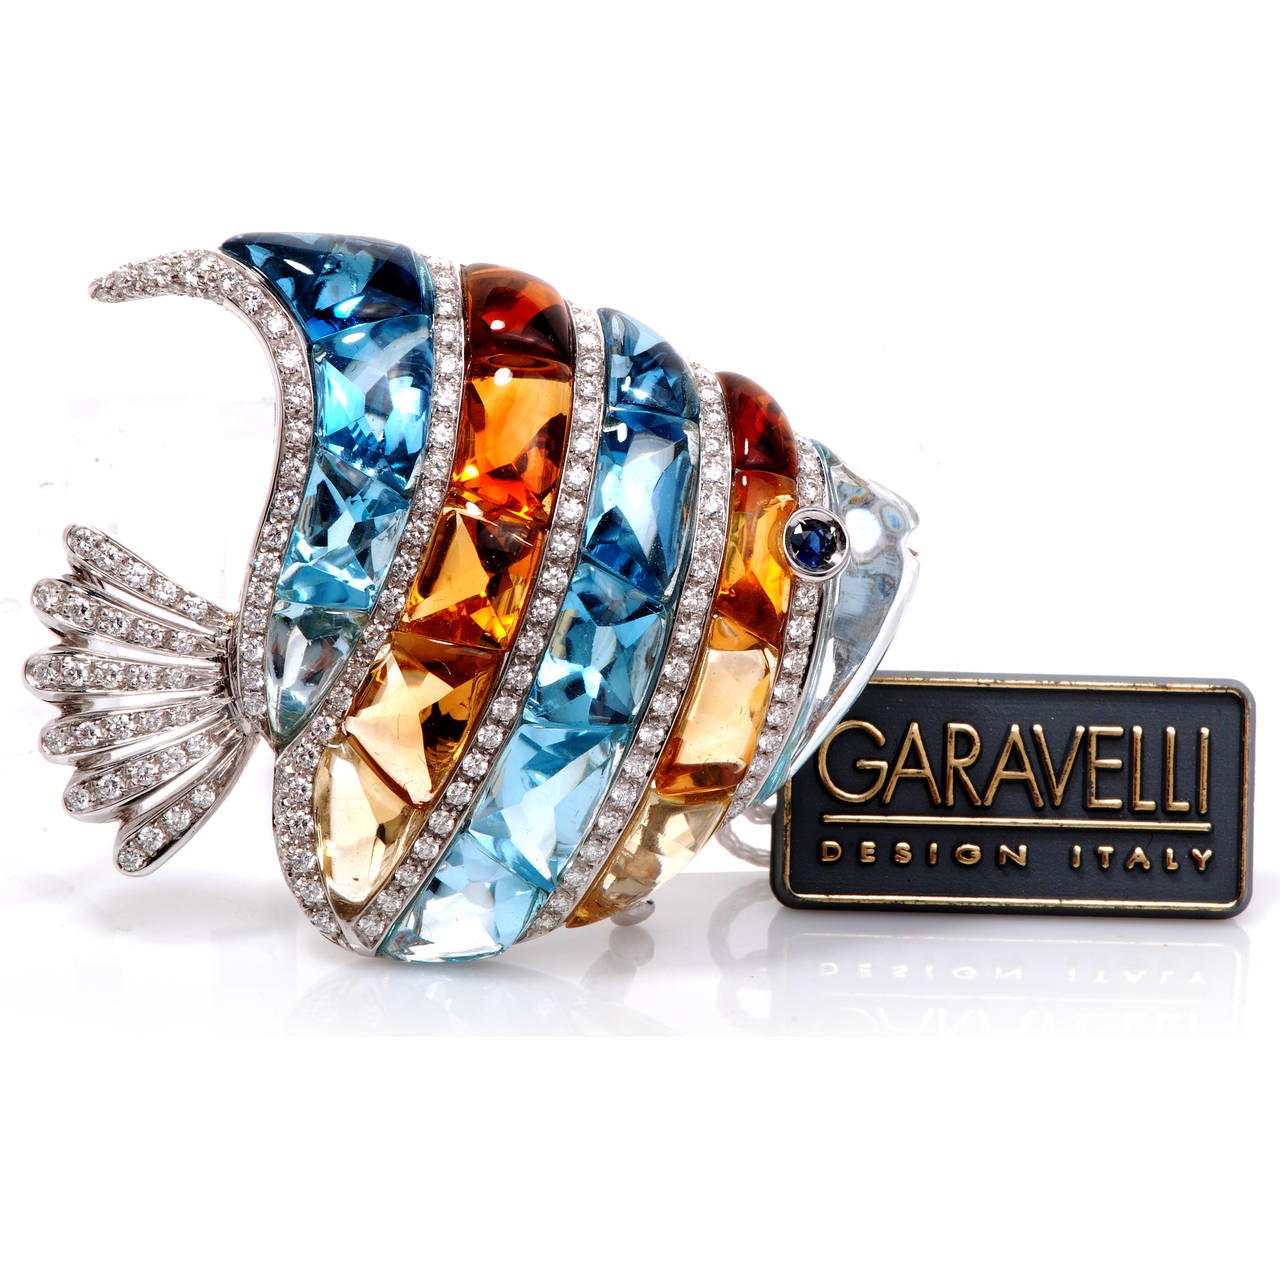 This adorable Garavelli Design Angel Fish pin is crafted beautifully in solid 18K white gold. This pin is accented with some 128 genuine pave set diamonds approx 3.00cttw, G color, VVS clarity, 10 calibrated cabochon genuine blue topaz and 9 genuine